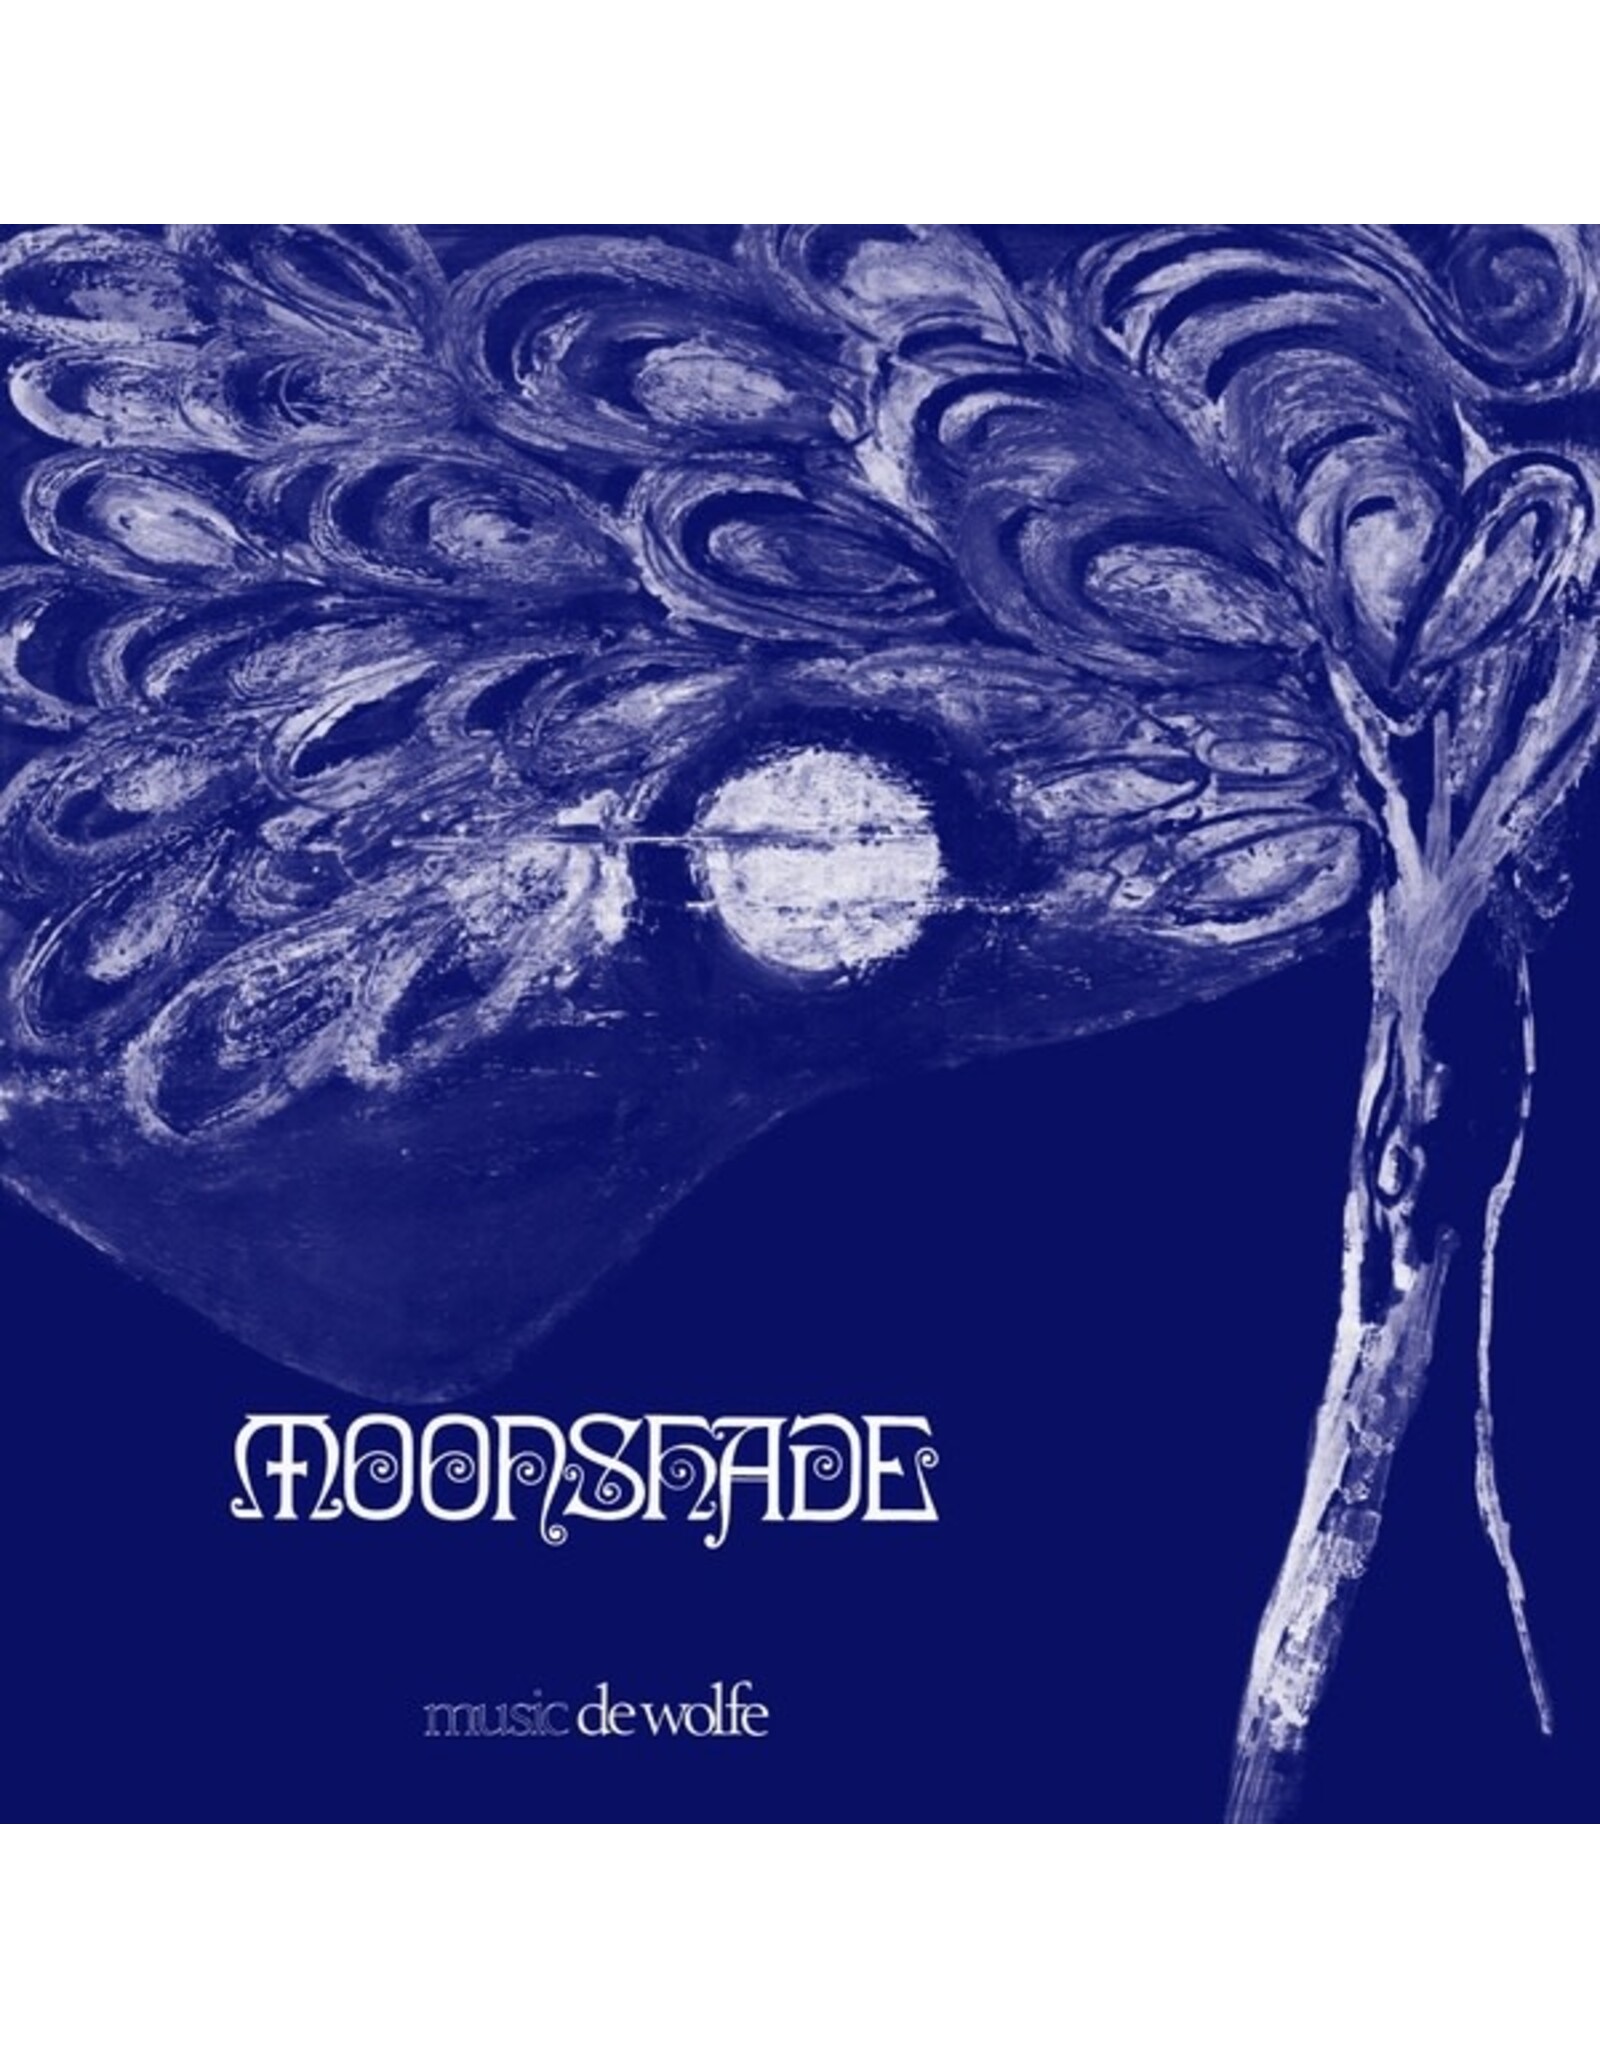 Be With Webb, Roger Sound: Moonshade LP